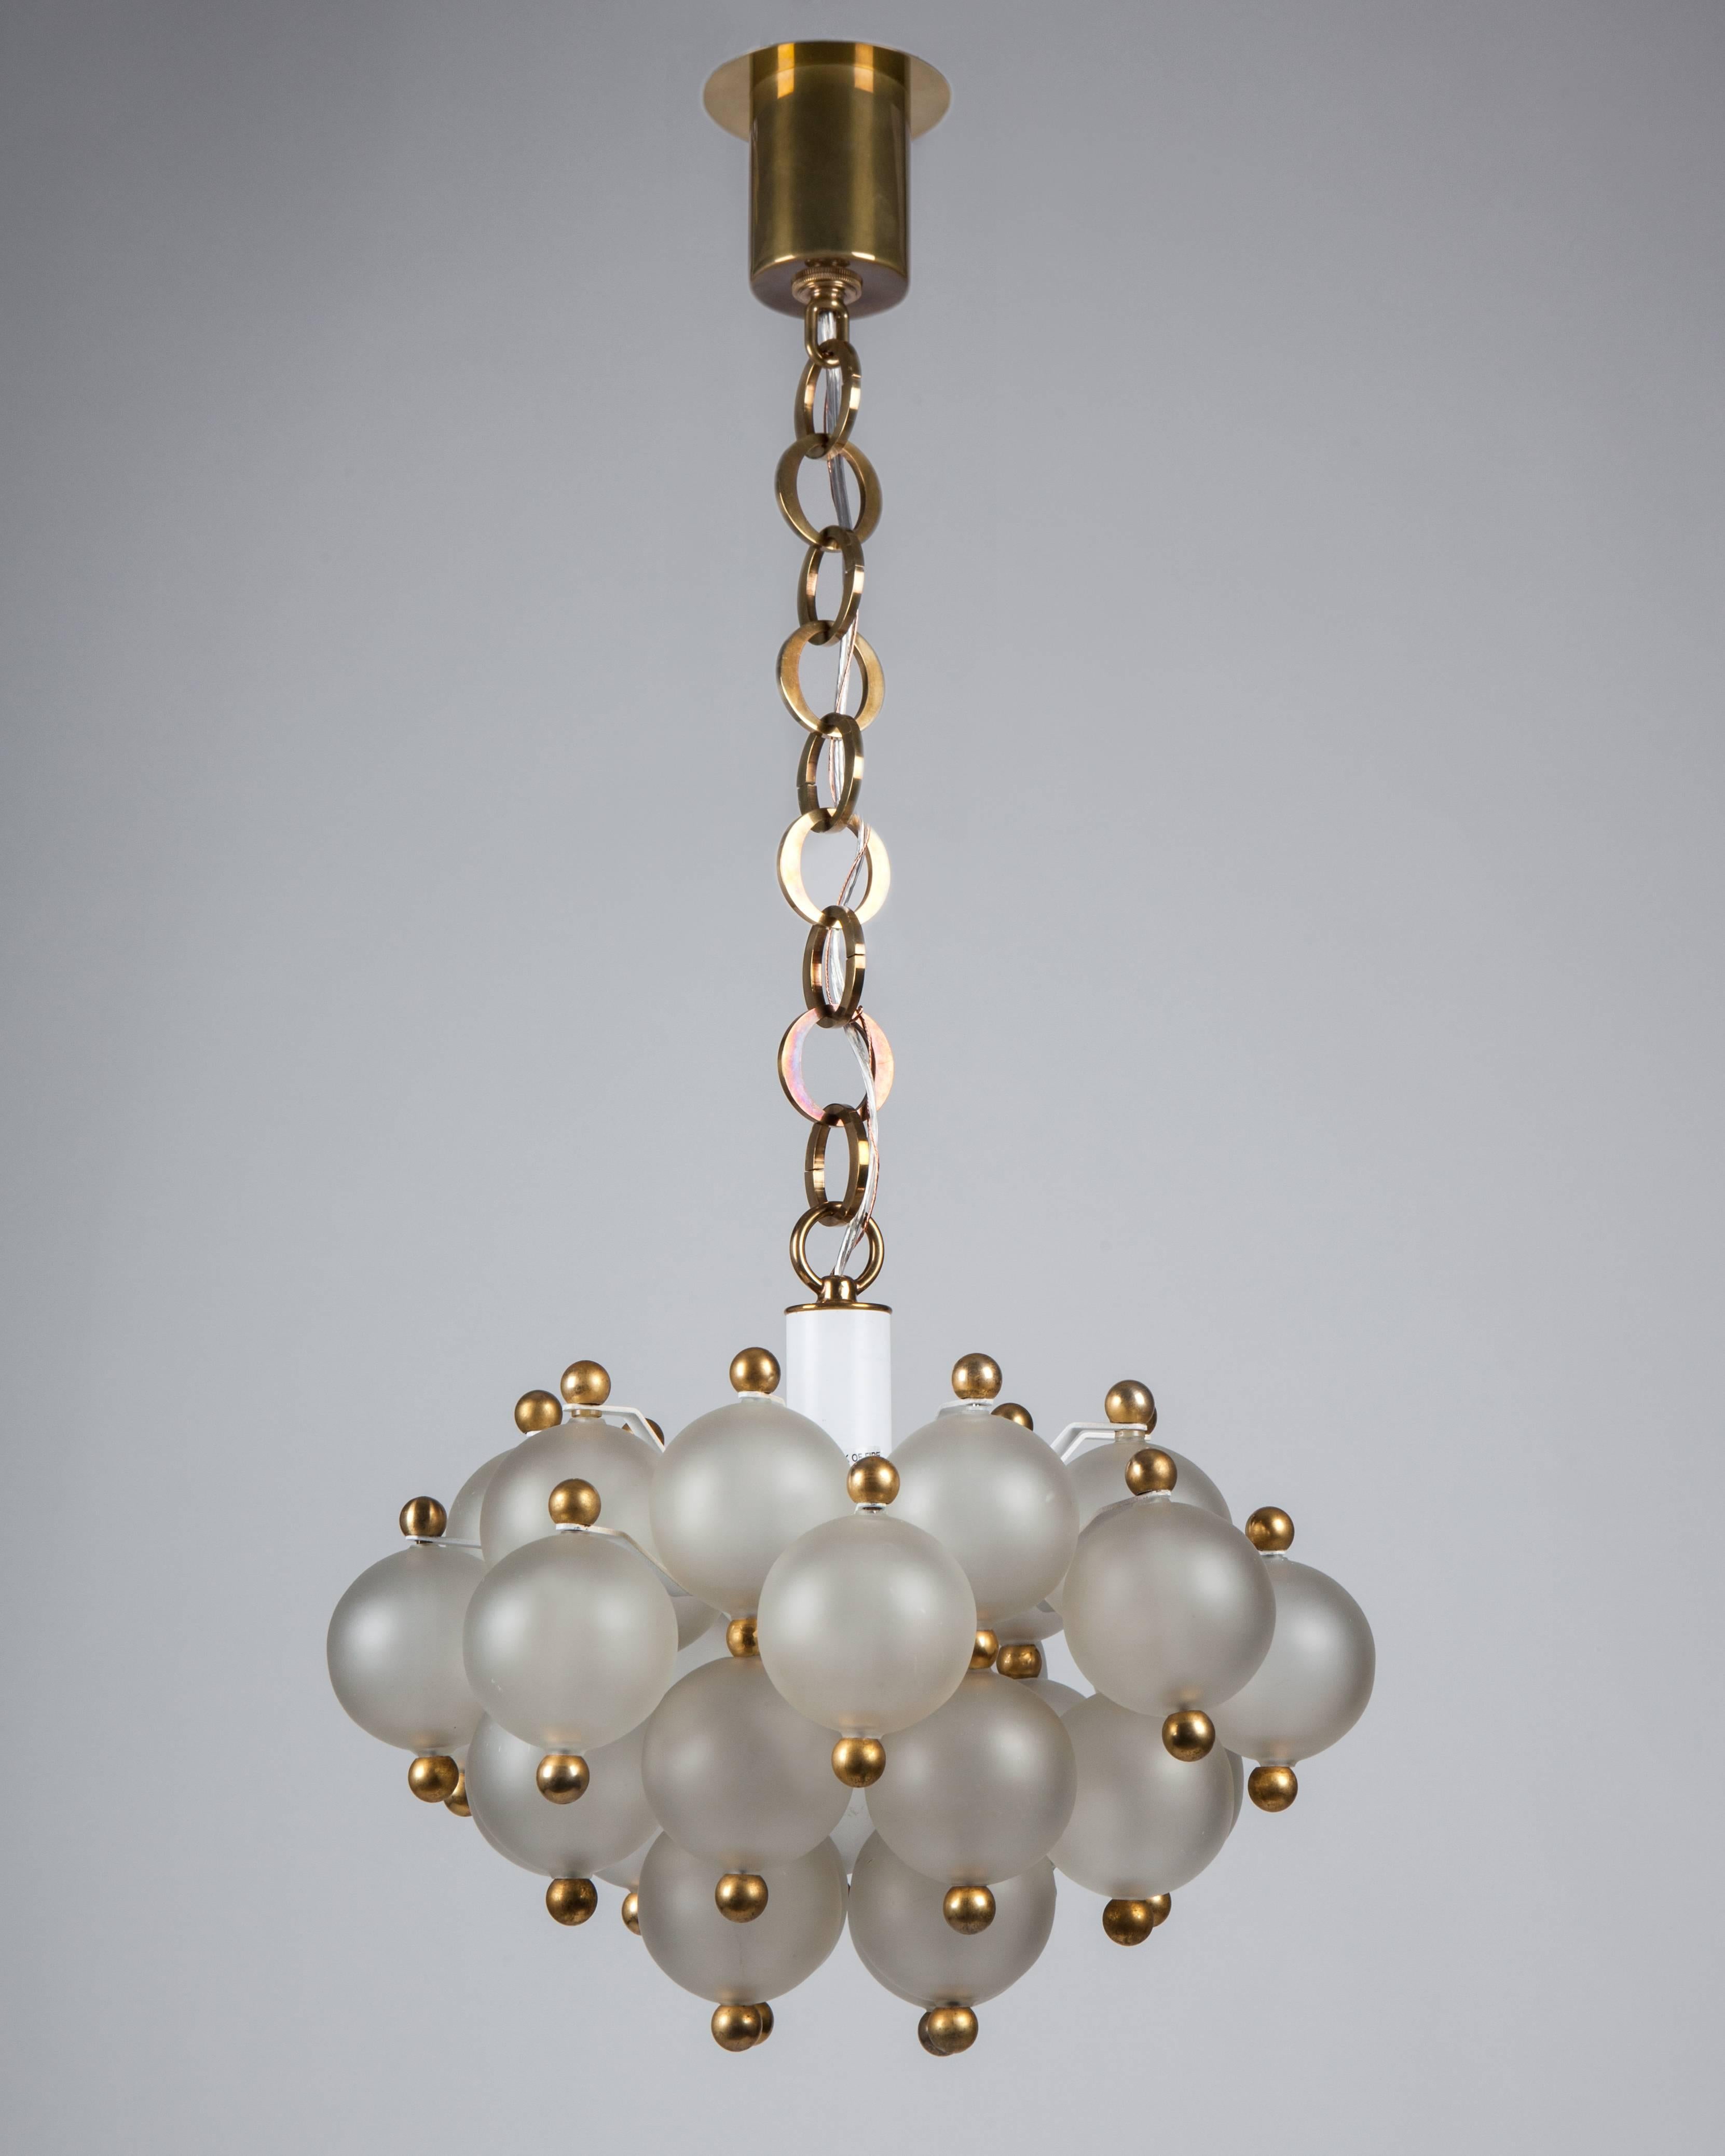 AHL3999
A vintage mid century modern pendant with frosted glass spheres on aged brass and white lacquer metalwork. Attributed to the Italian Murano glass maker Seguso. Due to the antique nature of this fixture, there may be some nicks or